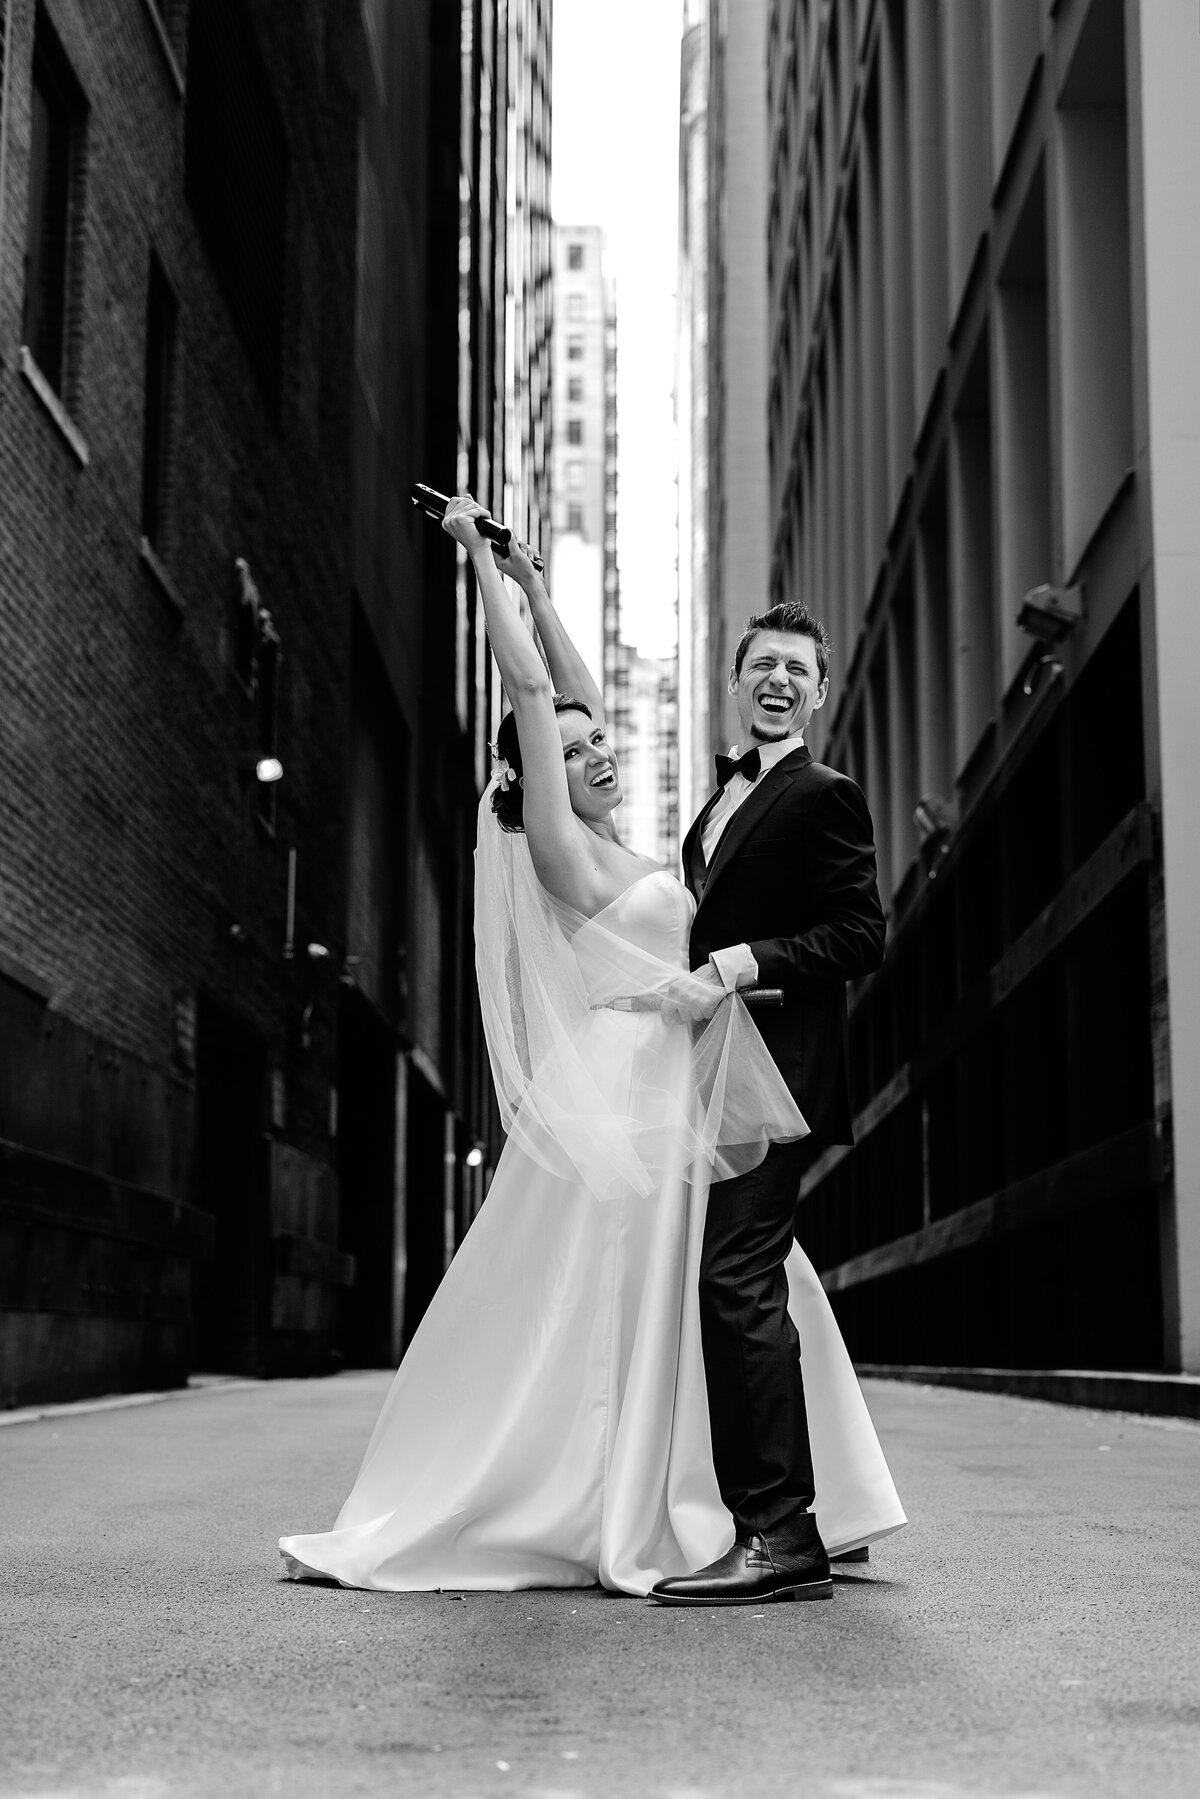 Groom pulled his bride in white wedding dress closer to him in nunchucks in Chicago